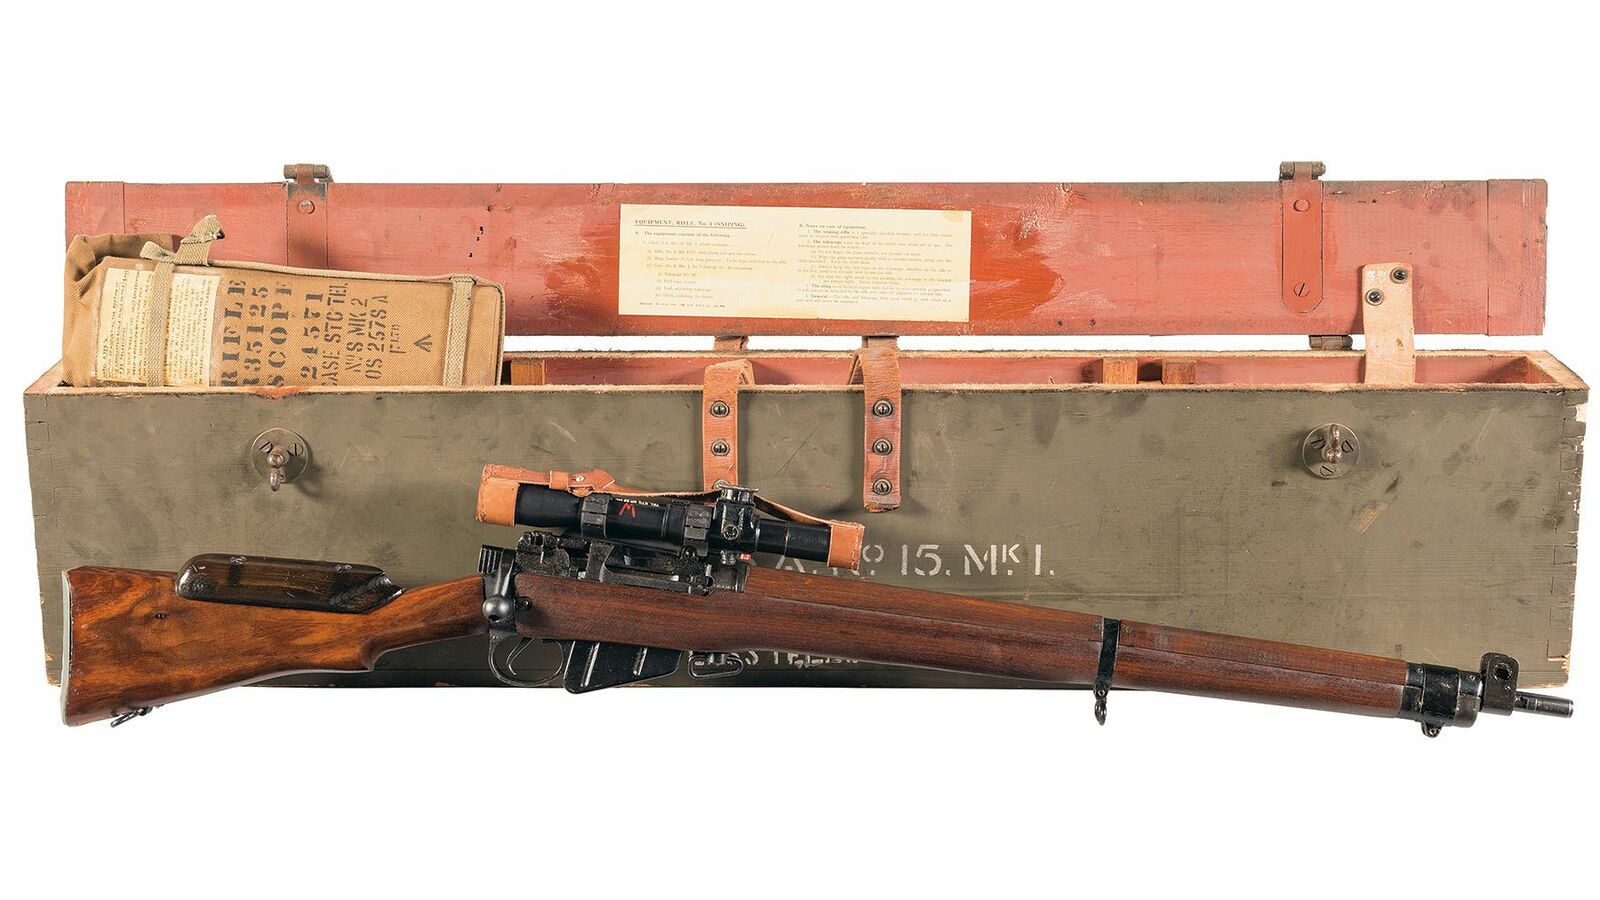 Sold at Auction: Lee Enfield No. 4 Mk I Bolt Action Rifle